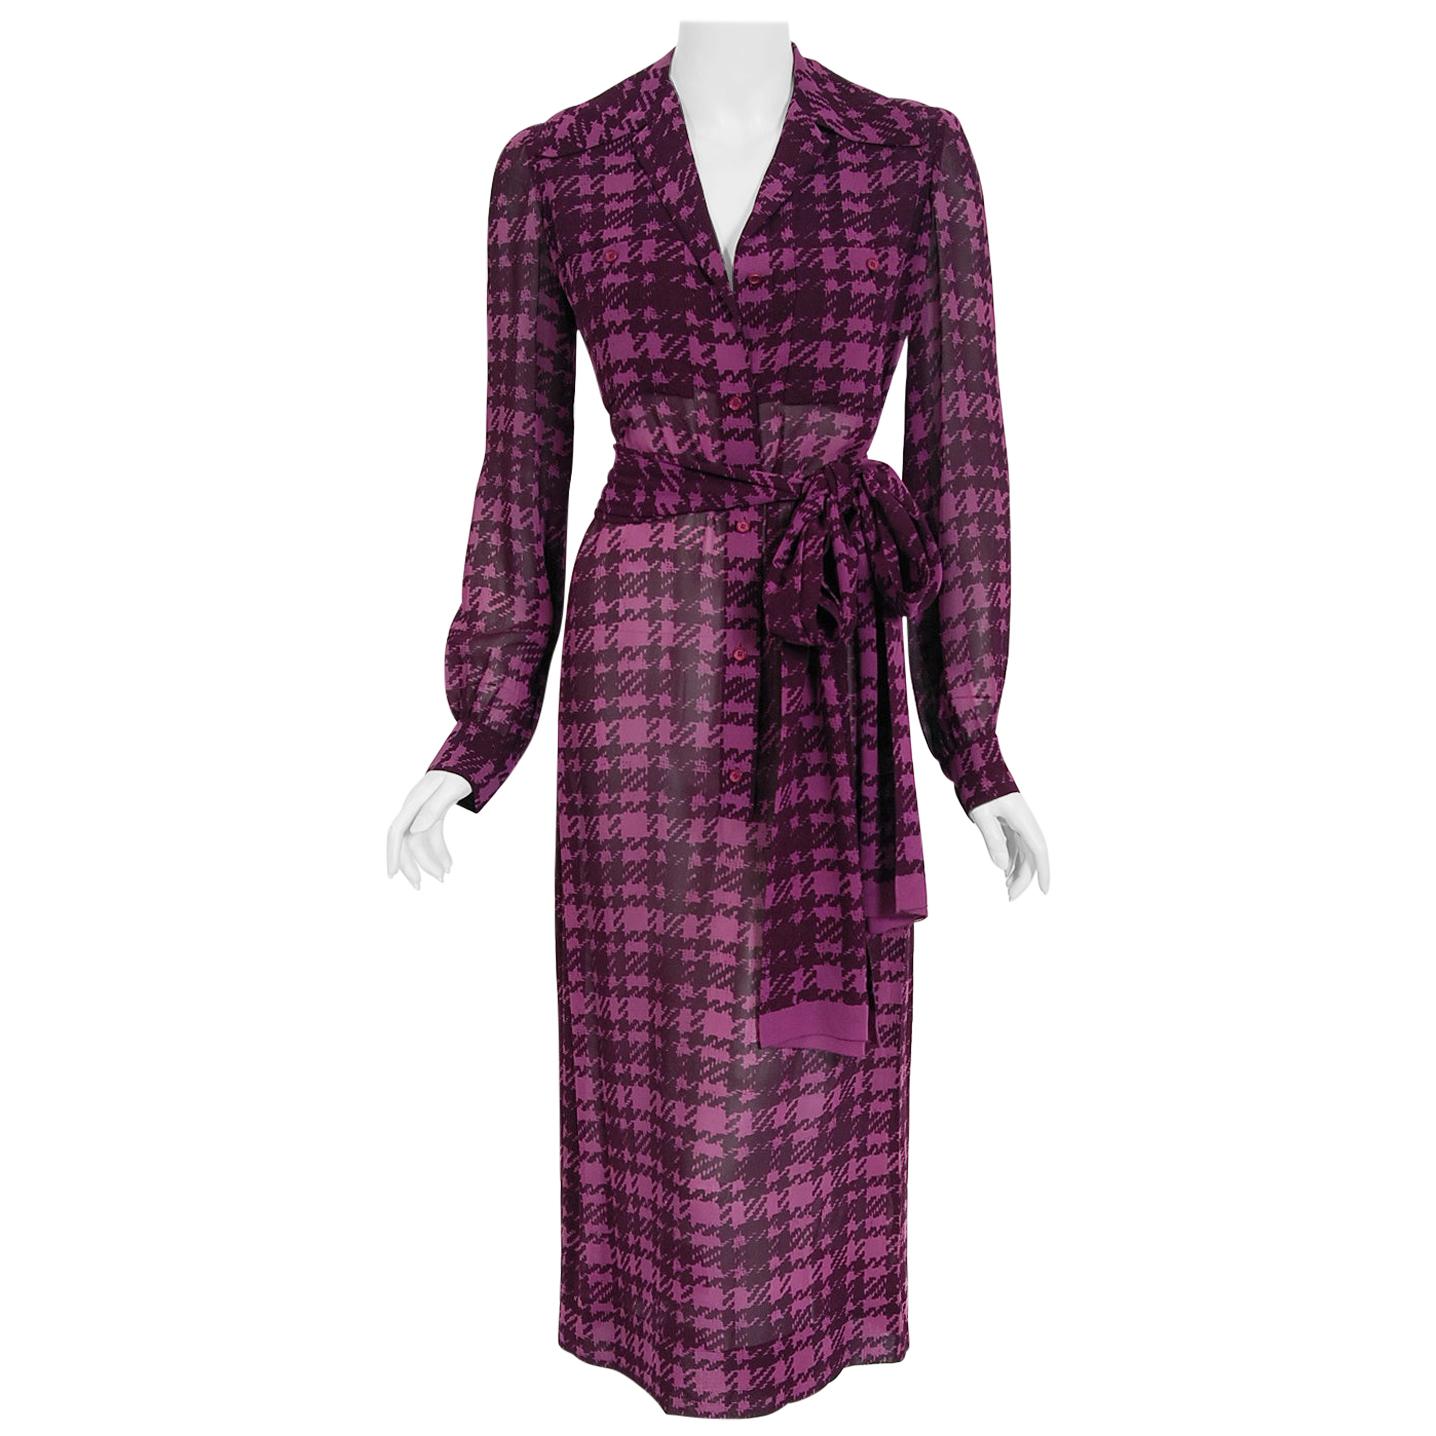 Vintage 1969 Christian Dior Haute Couture Purple Houndstooth Silk Belted Dress